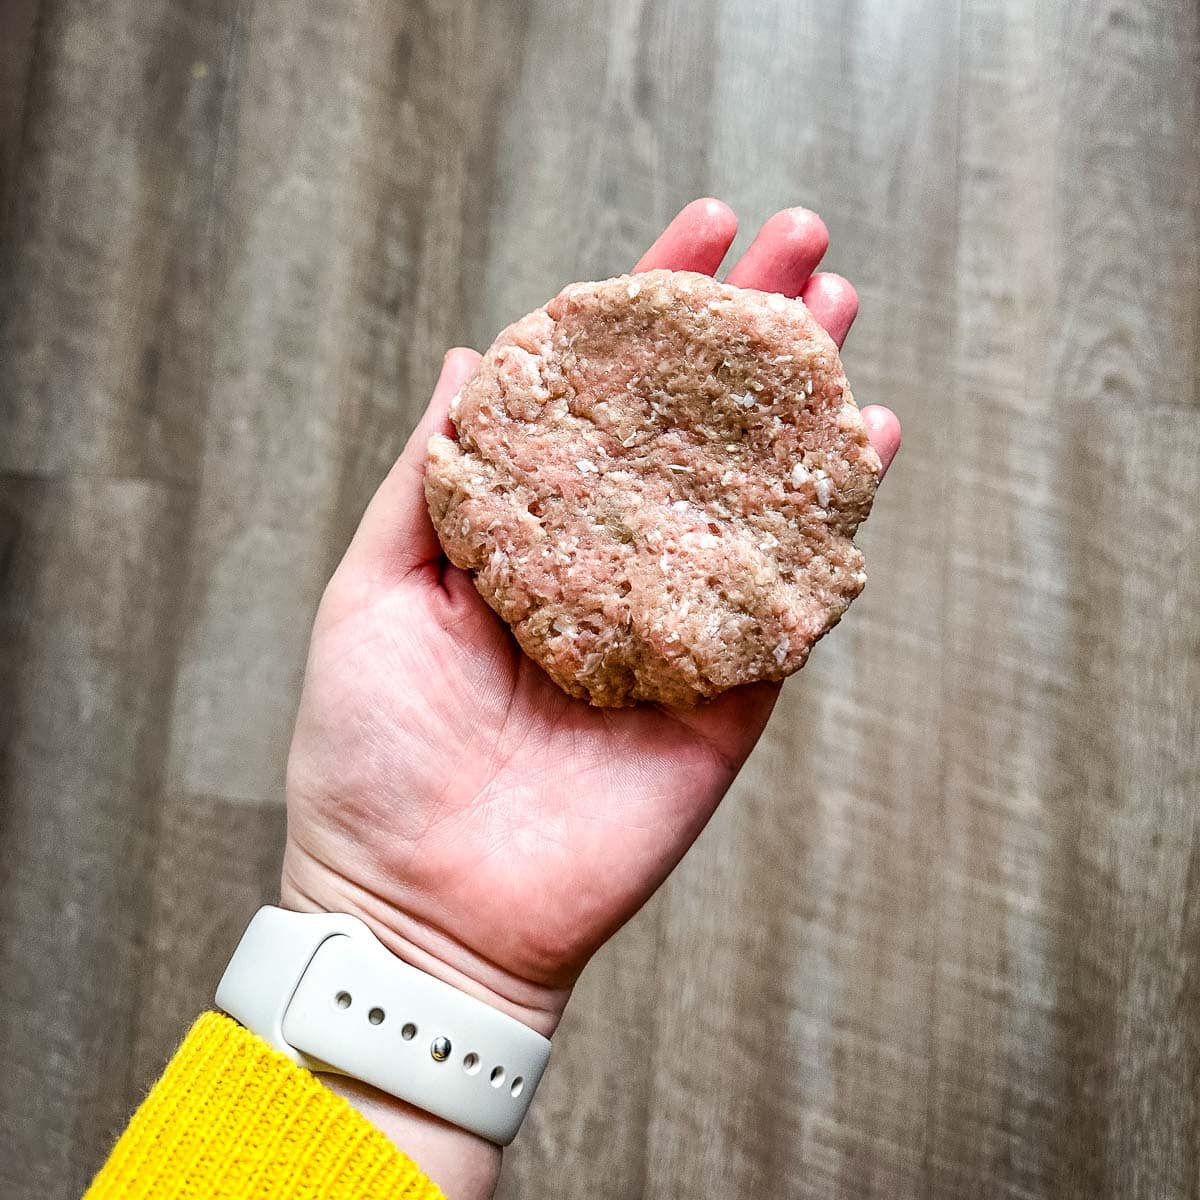 A formed turkey burger is held over a wooden backdrop.